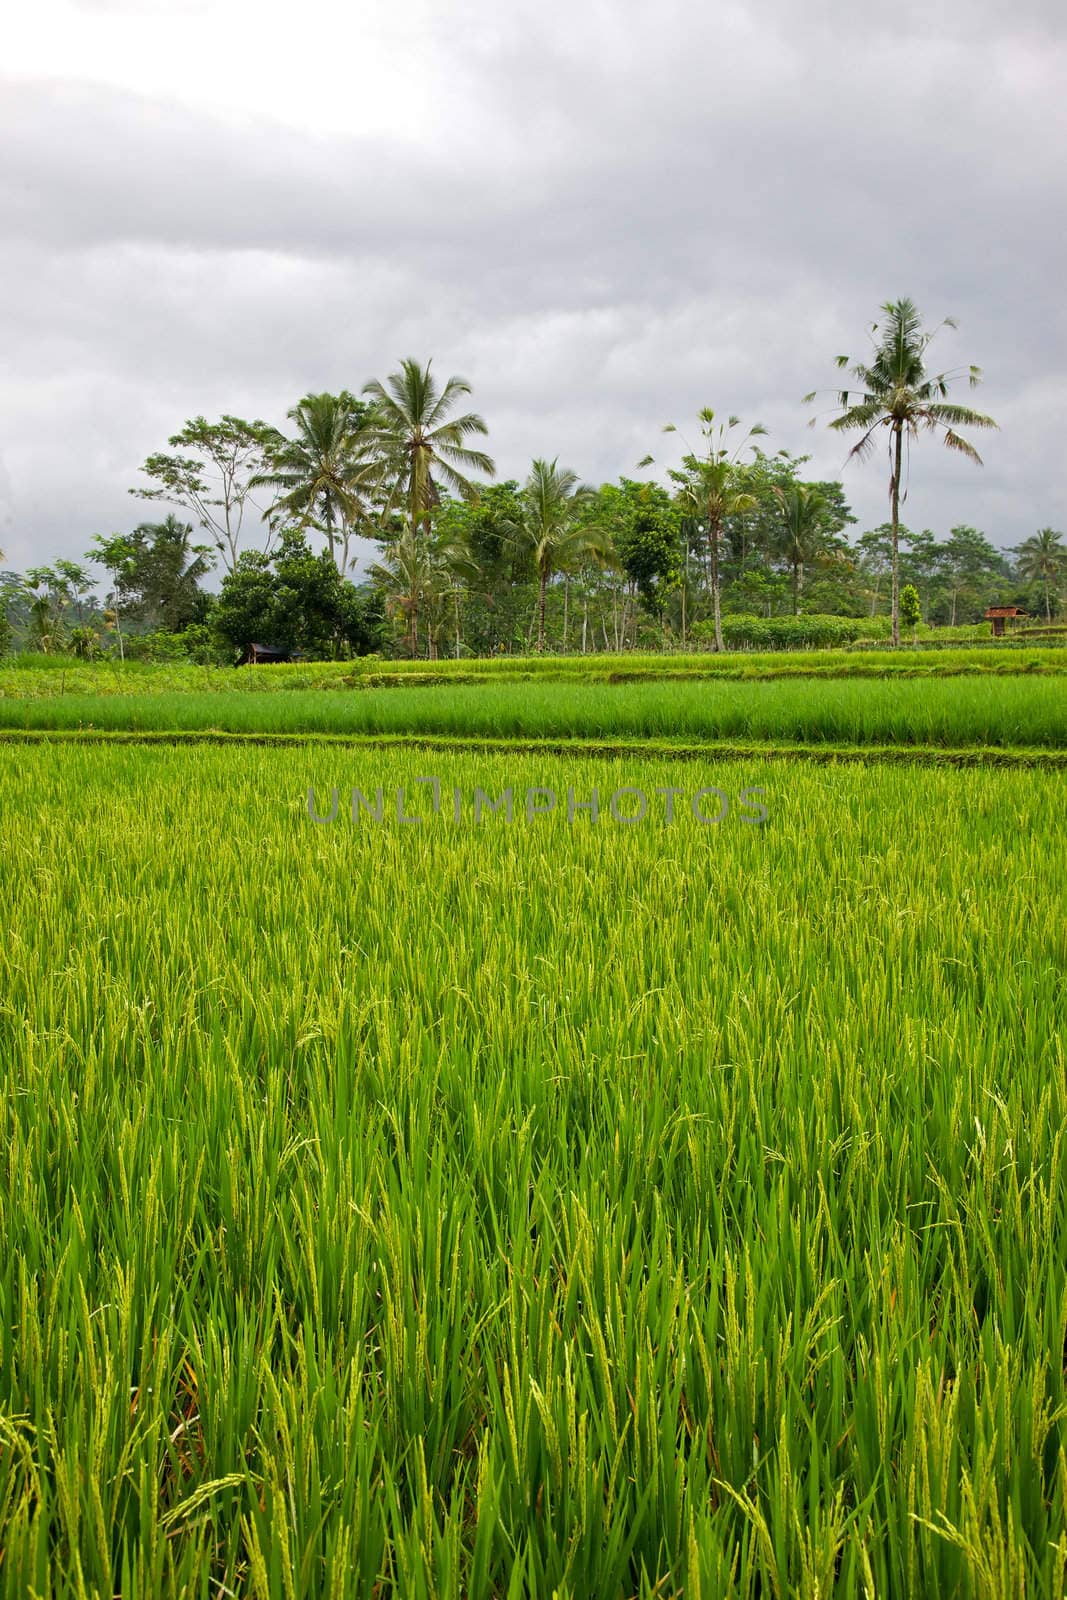 A rice paddy in the Central Highlands of the island of Bali, Indonesia.